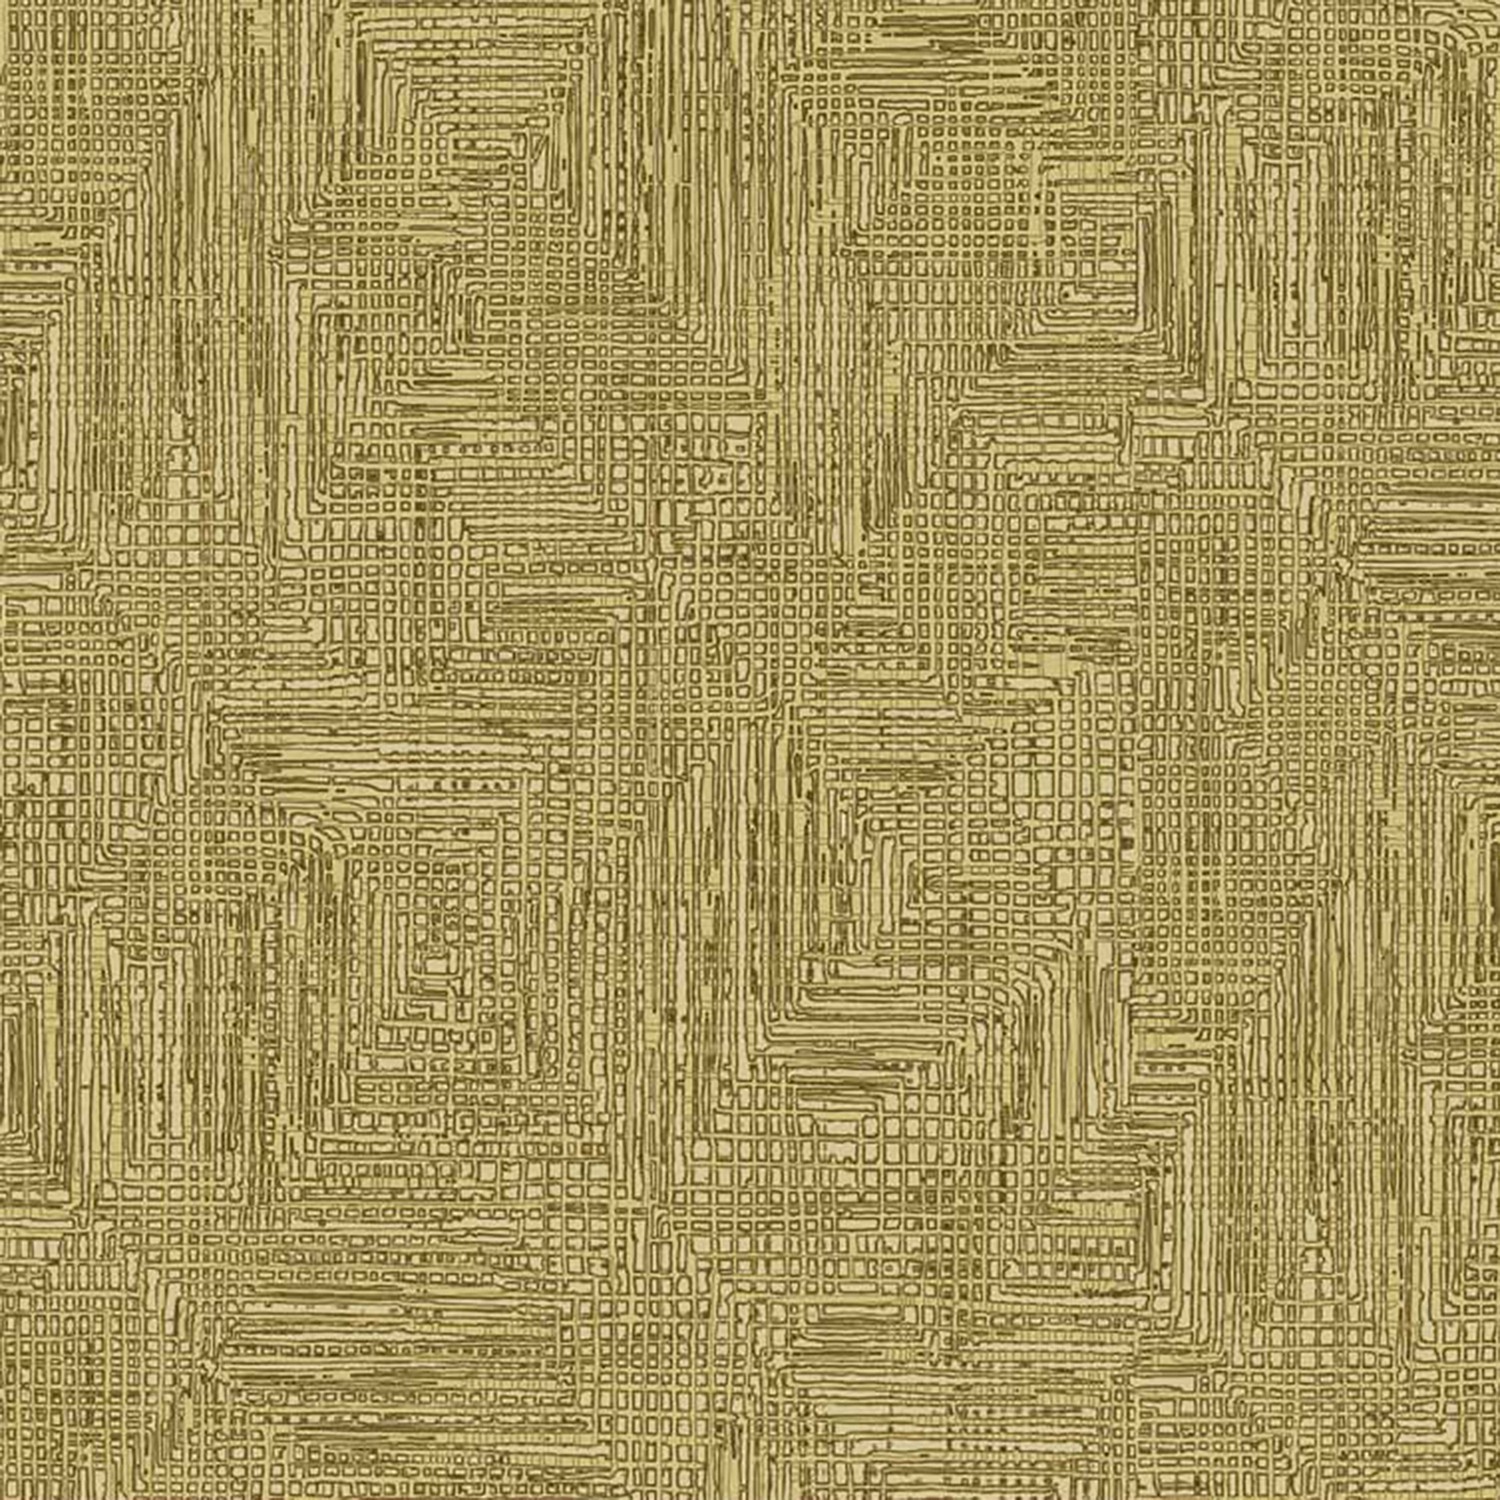 Backing Fabrics Grass Roots Golden Tan 108 in Wide Backing Fabric Yardage